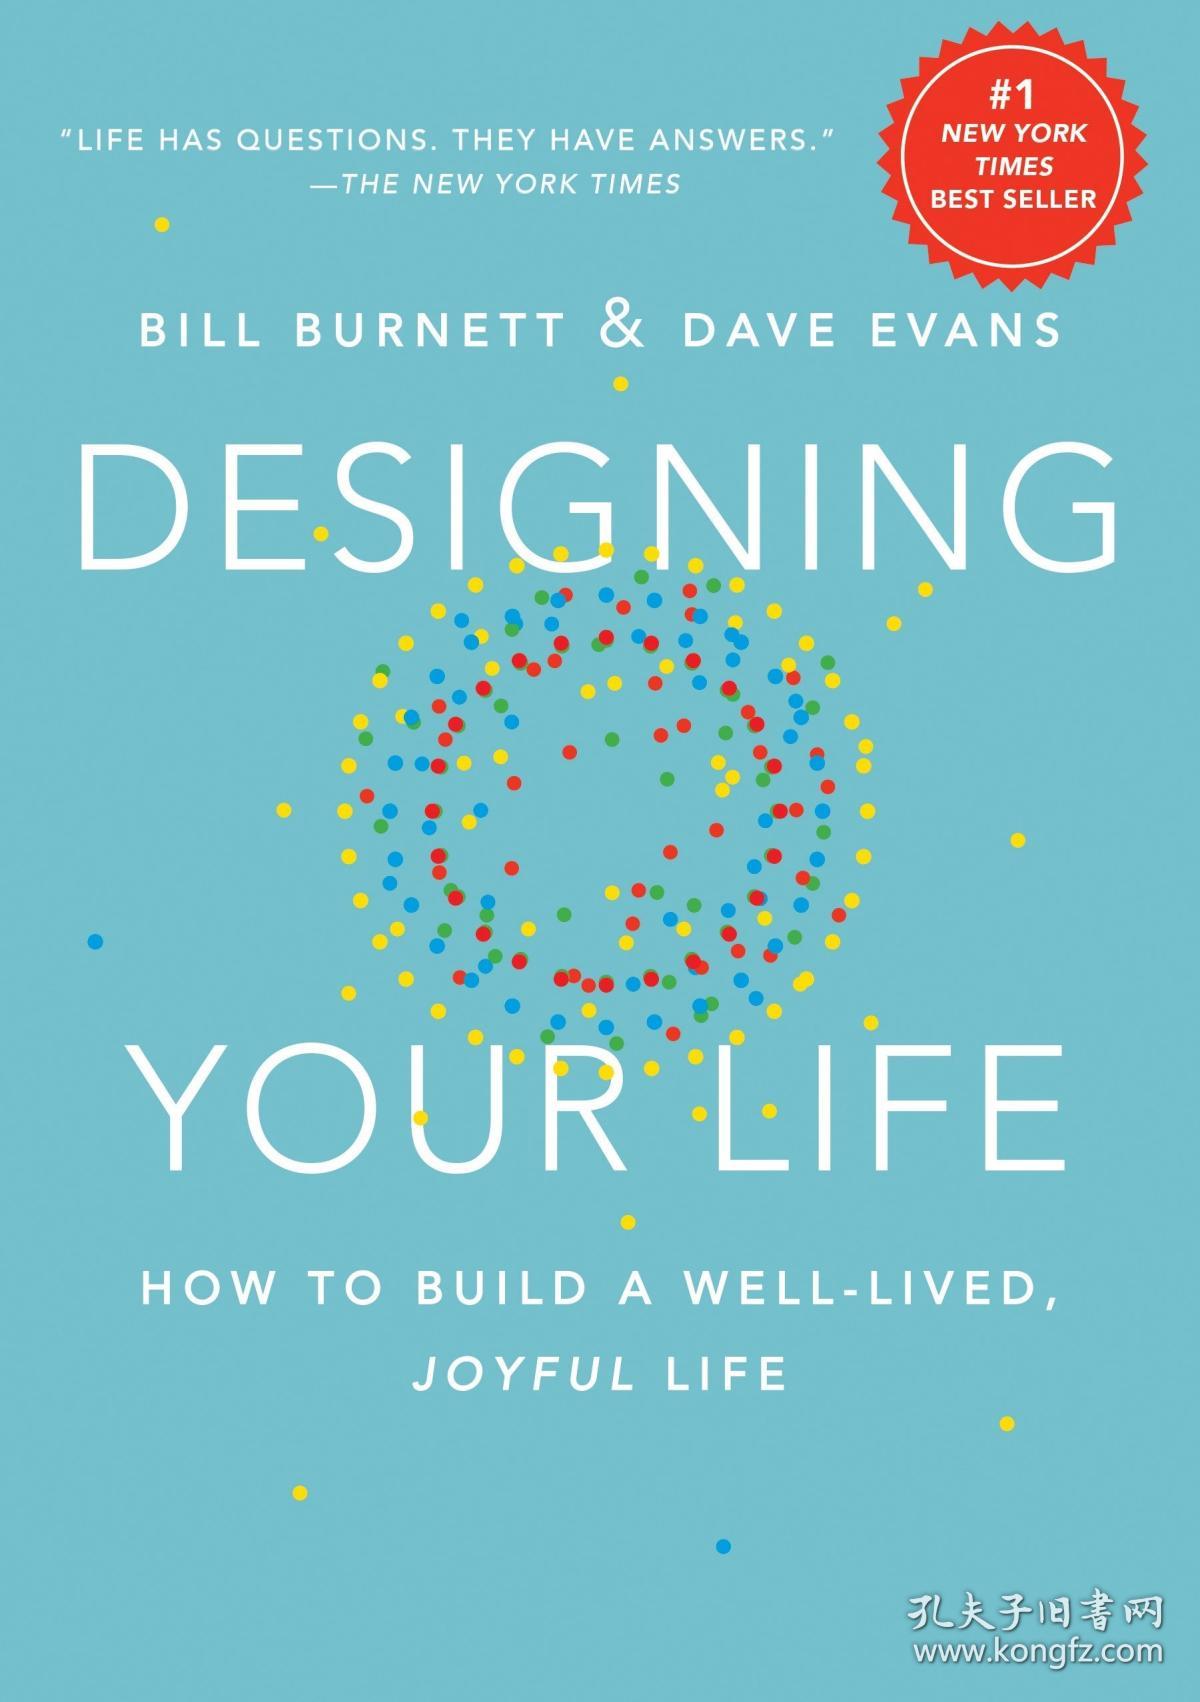 Designing Your Life: How to Build a Well-Lived